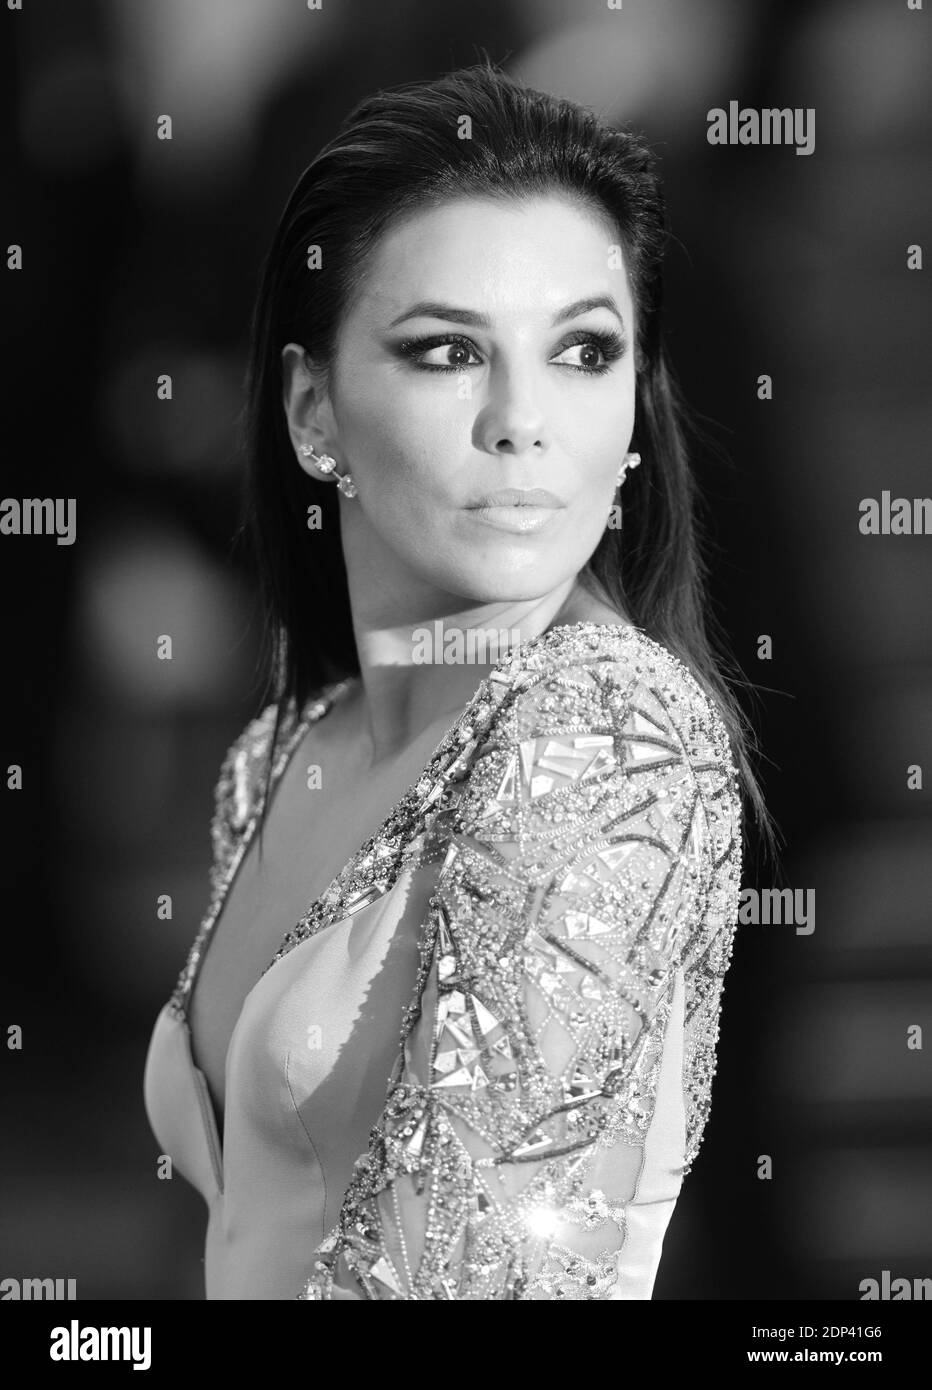 Eva Longoria attends the screening of 'Inside Out' at the 68th Cannes Film Festival on May 18th, 2015 in Cannes, France. Photo by Lionel Hahn/ABACAPRESS.COM Stock Photo